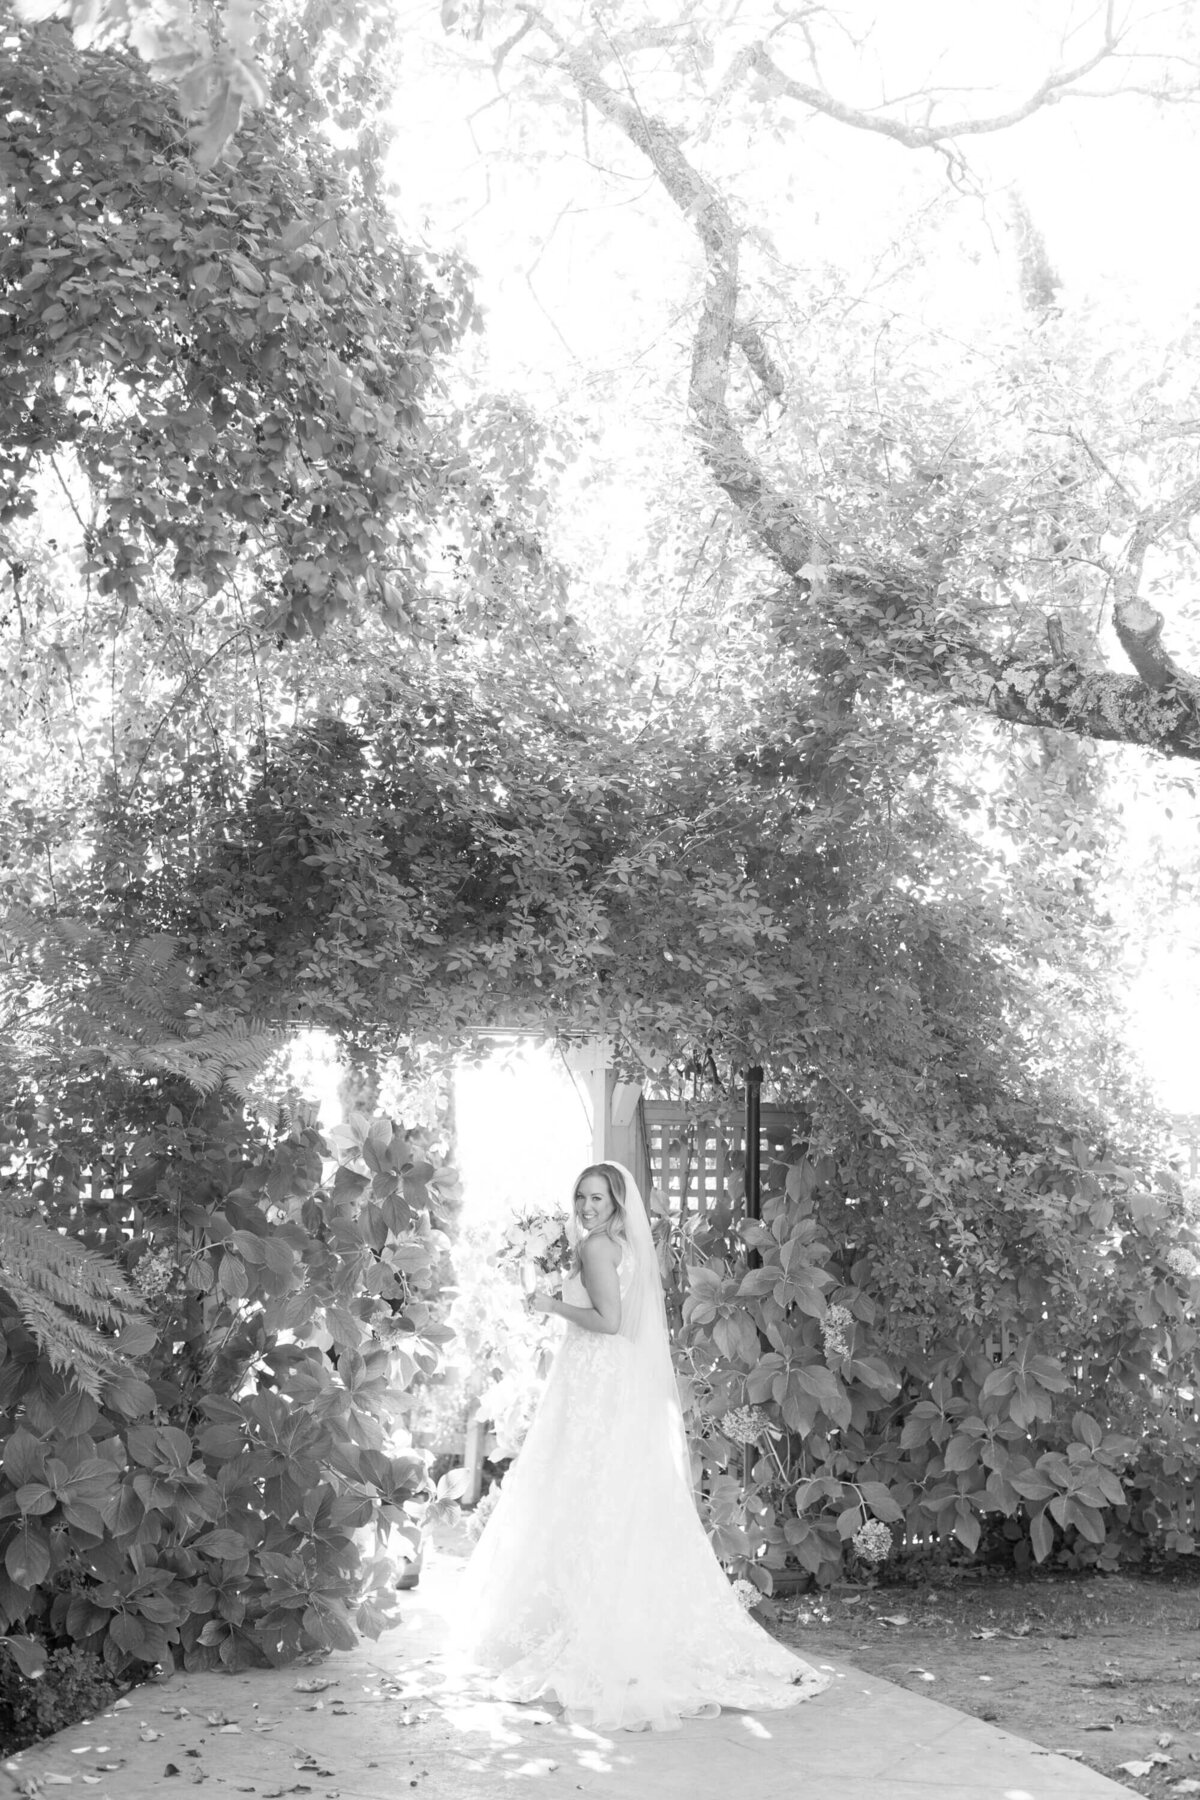 Bride in white wedding attire enters a vineyard wedding venue through a gate adorned with natural plants and leaves.